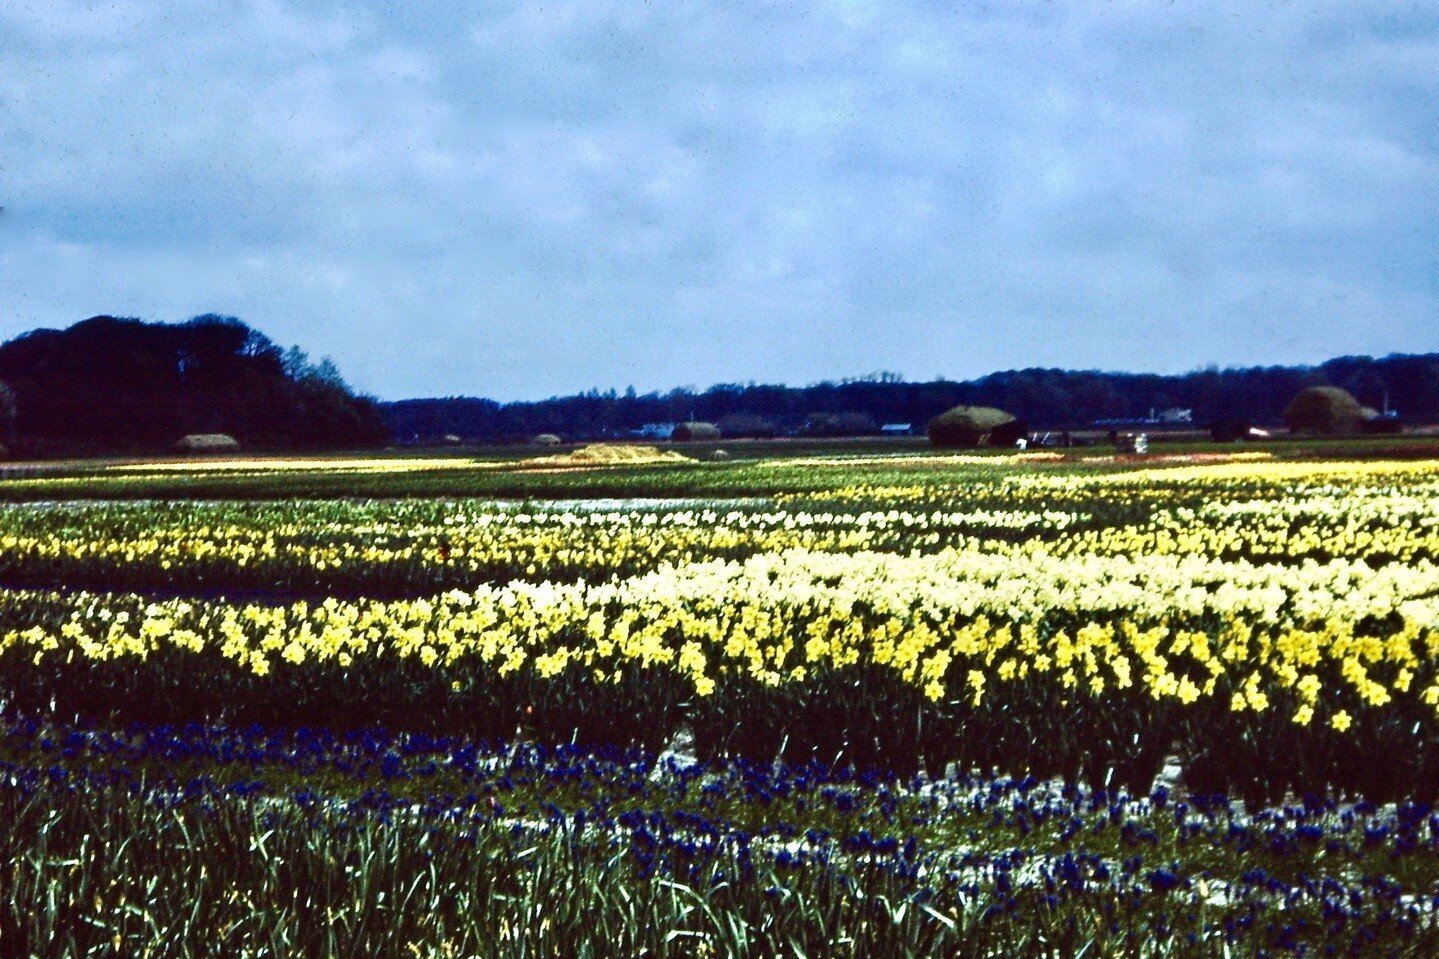 Hello, Spring! ⁠Happy vernal equinox, aka the first day of Spring!⁠
⁠
Spring officially begins at 11:06 p.m. Eastern time this evening. ⁠
⁠
This image was found among a client's parents' old slides. The exact date and location are lost to time, but t